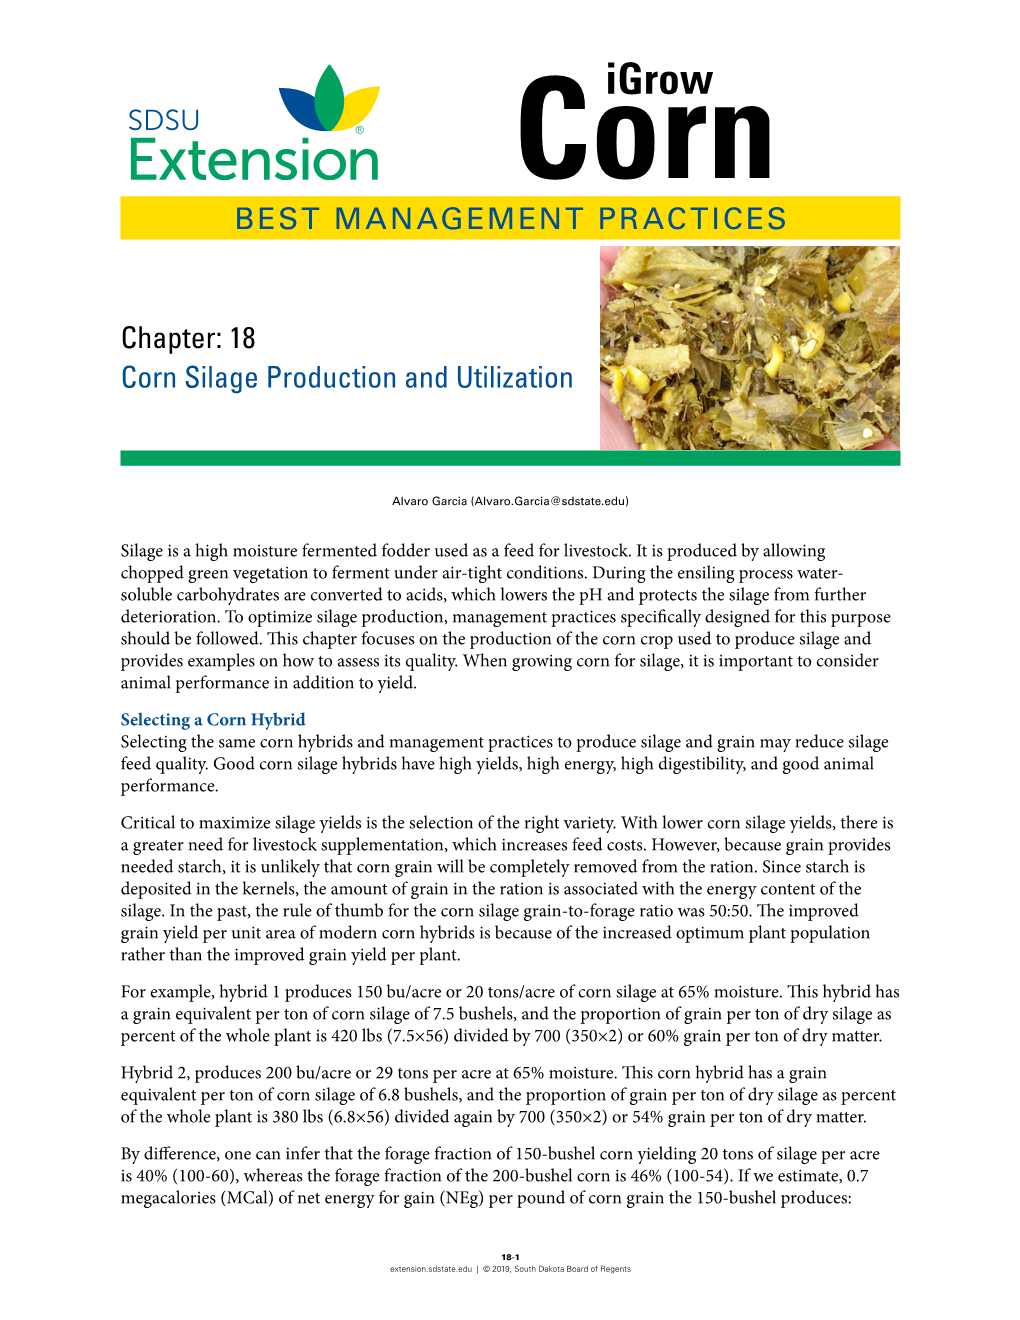 Corn Silage Production and Utilization